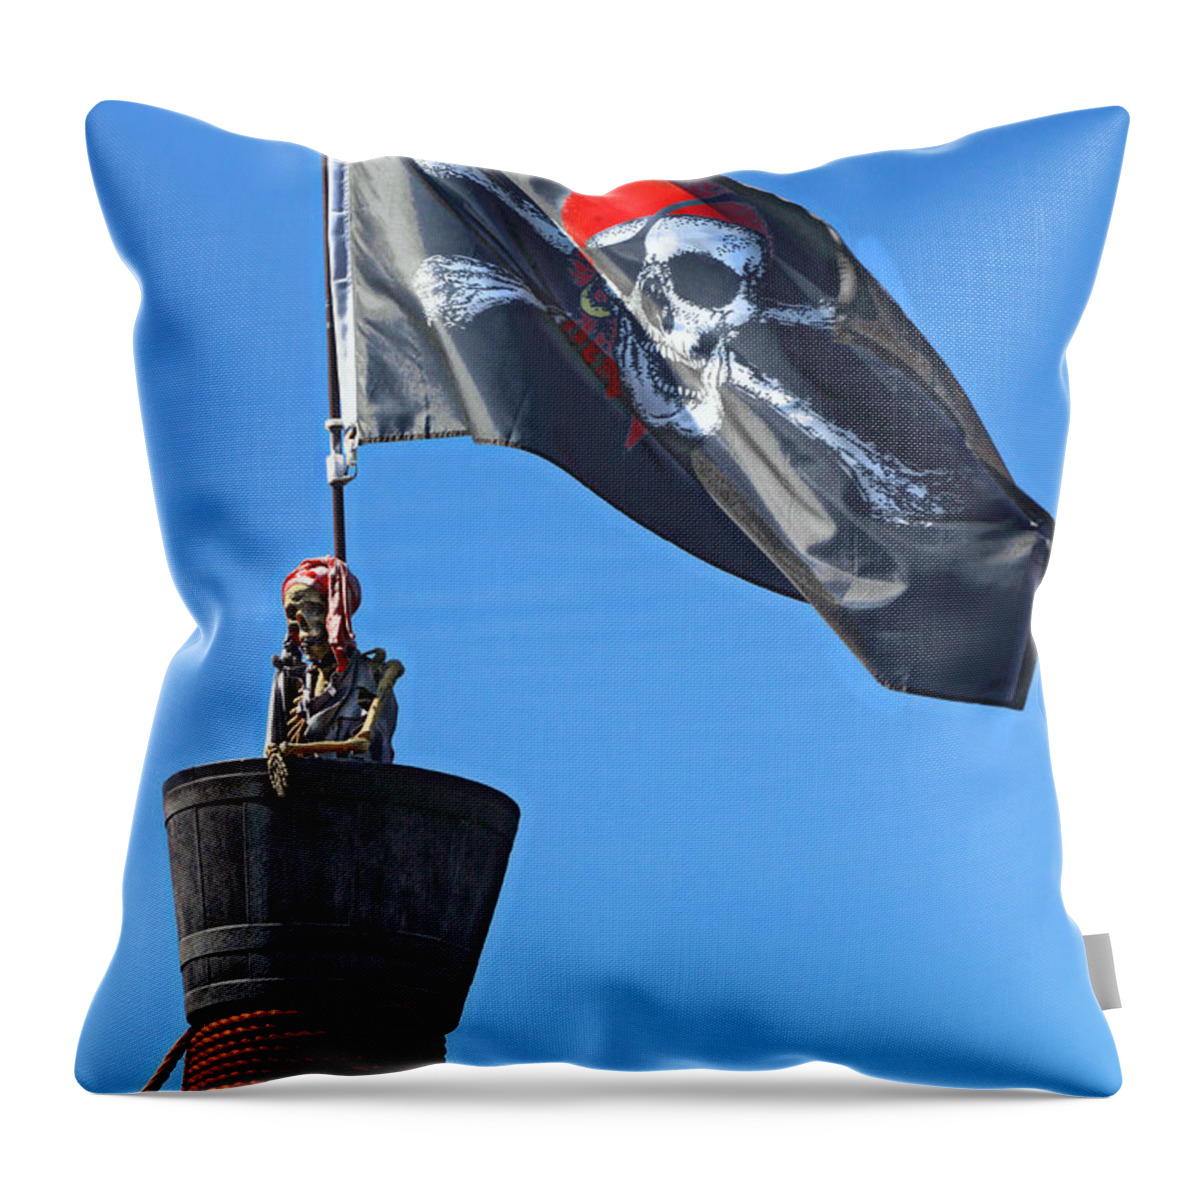 Jolly Rodger Throw Pillow featuring the photograph Jolly Rodger by Viktor Savchenko